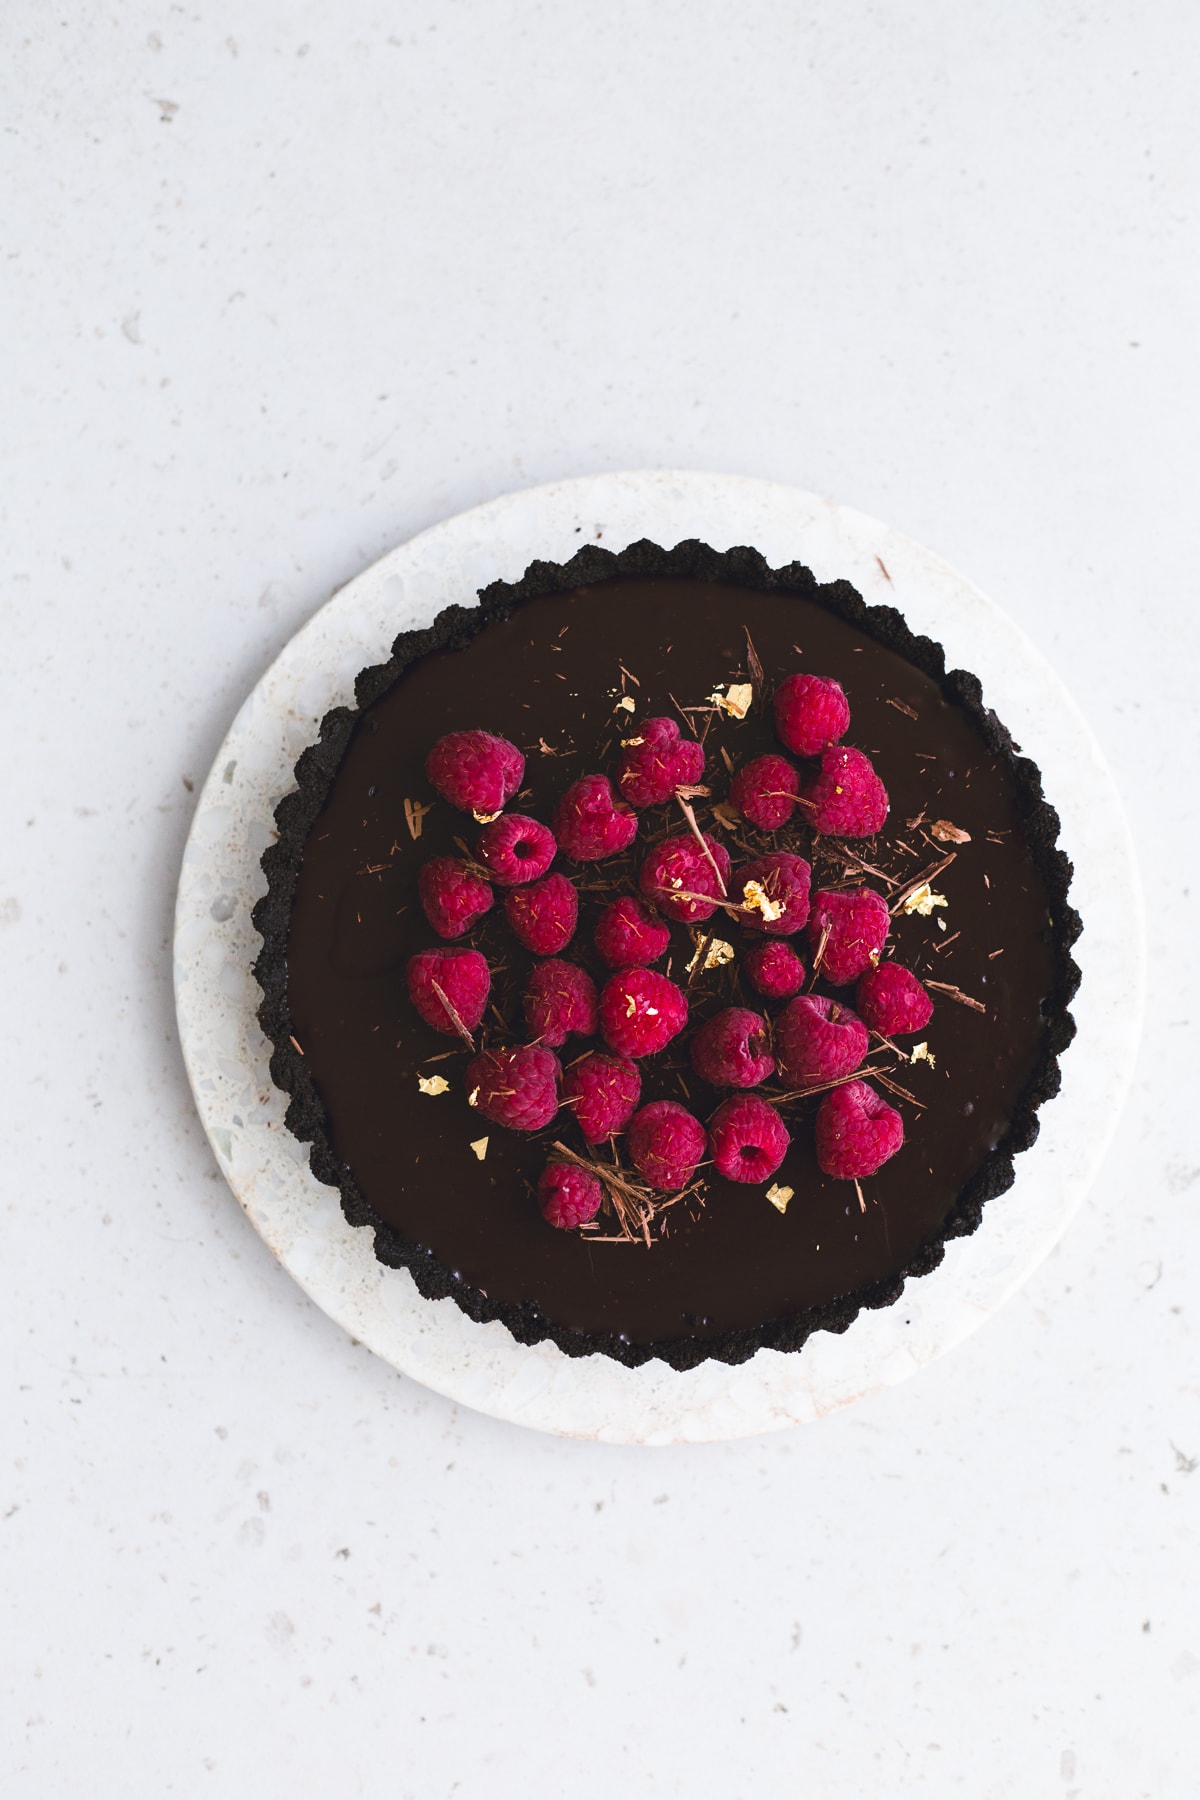 Wow your friends with this simple, delicious and quick Vegan Chocolate Ganache Tart recipe. Made in under 30 minutes and with only 6 ingredients! #chocolate #ganache #tart #simple #oreo #nobake #raspberry #nocook #chocolatetart #vegan #plantbased